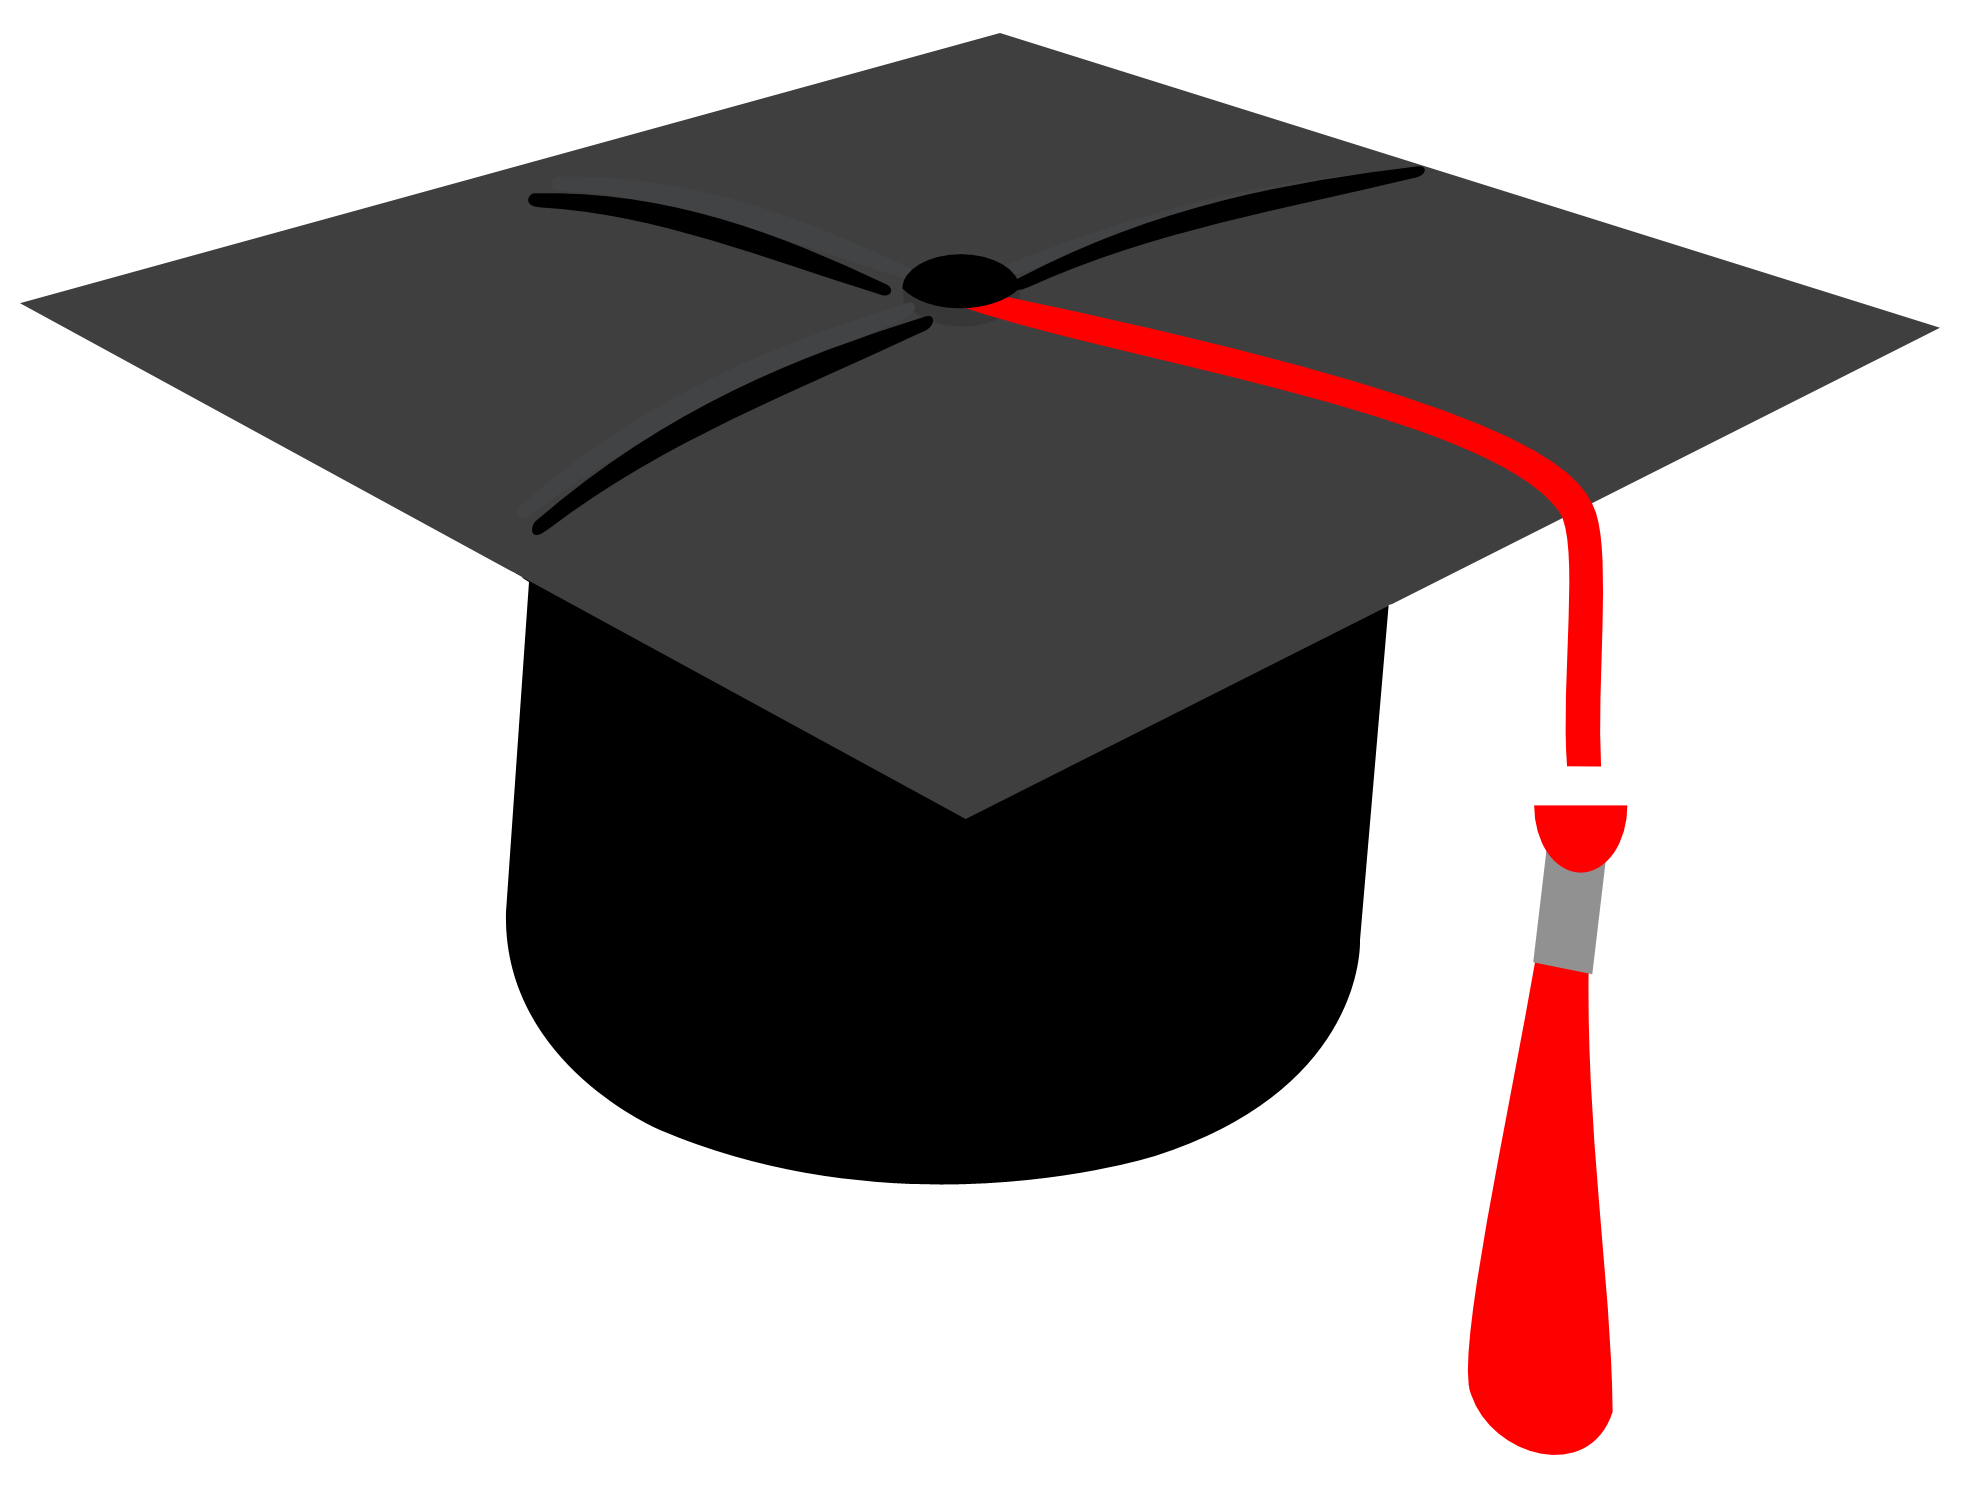 Download Graduation Cap PNG Image for Free